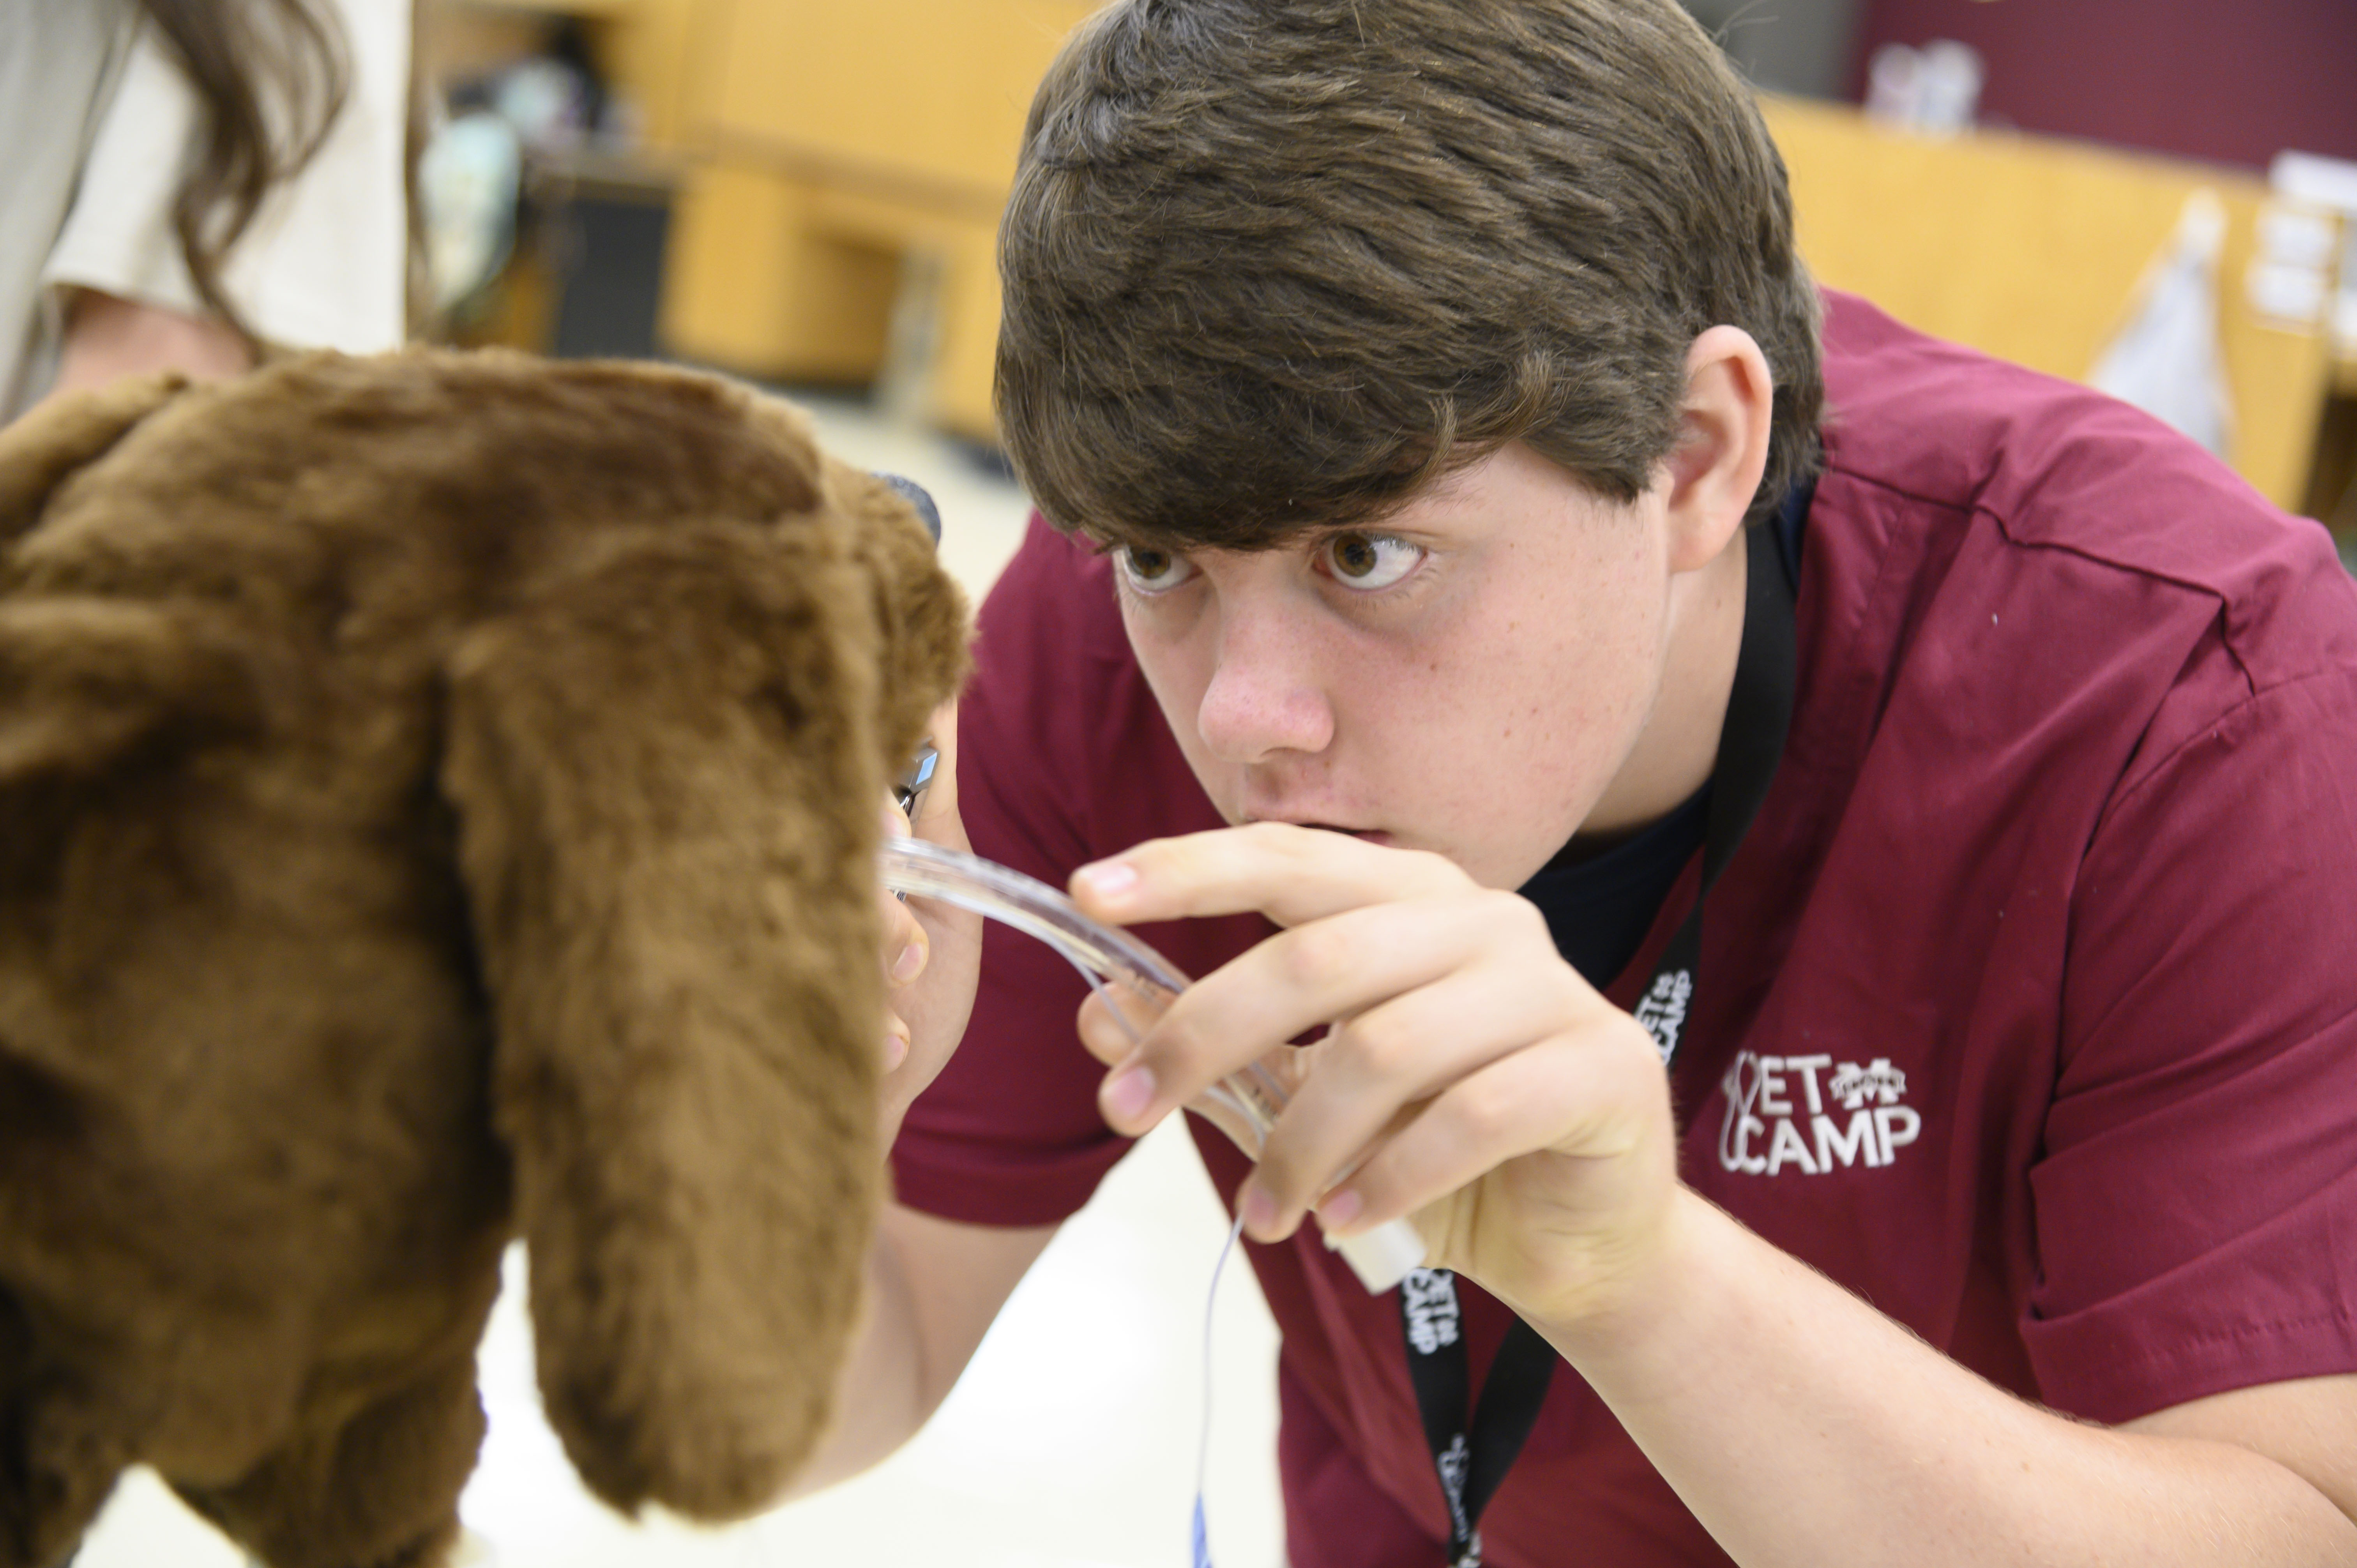 A student examines the mouth of a model dog